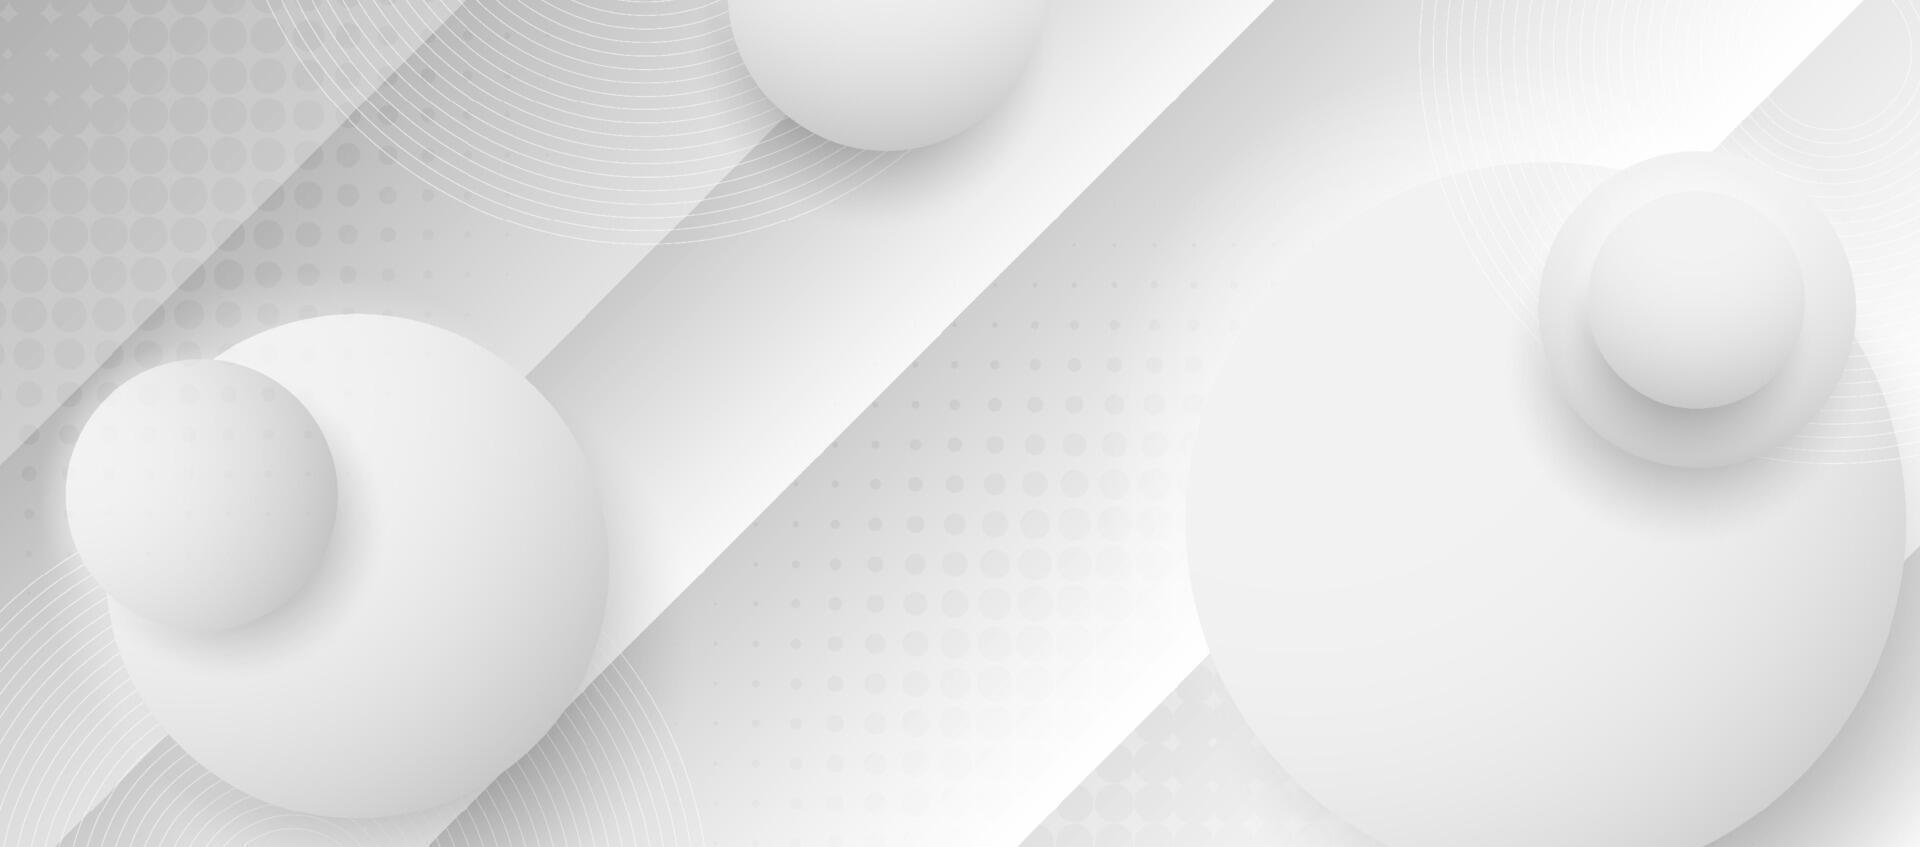 White and gray minimal abstract background vector